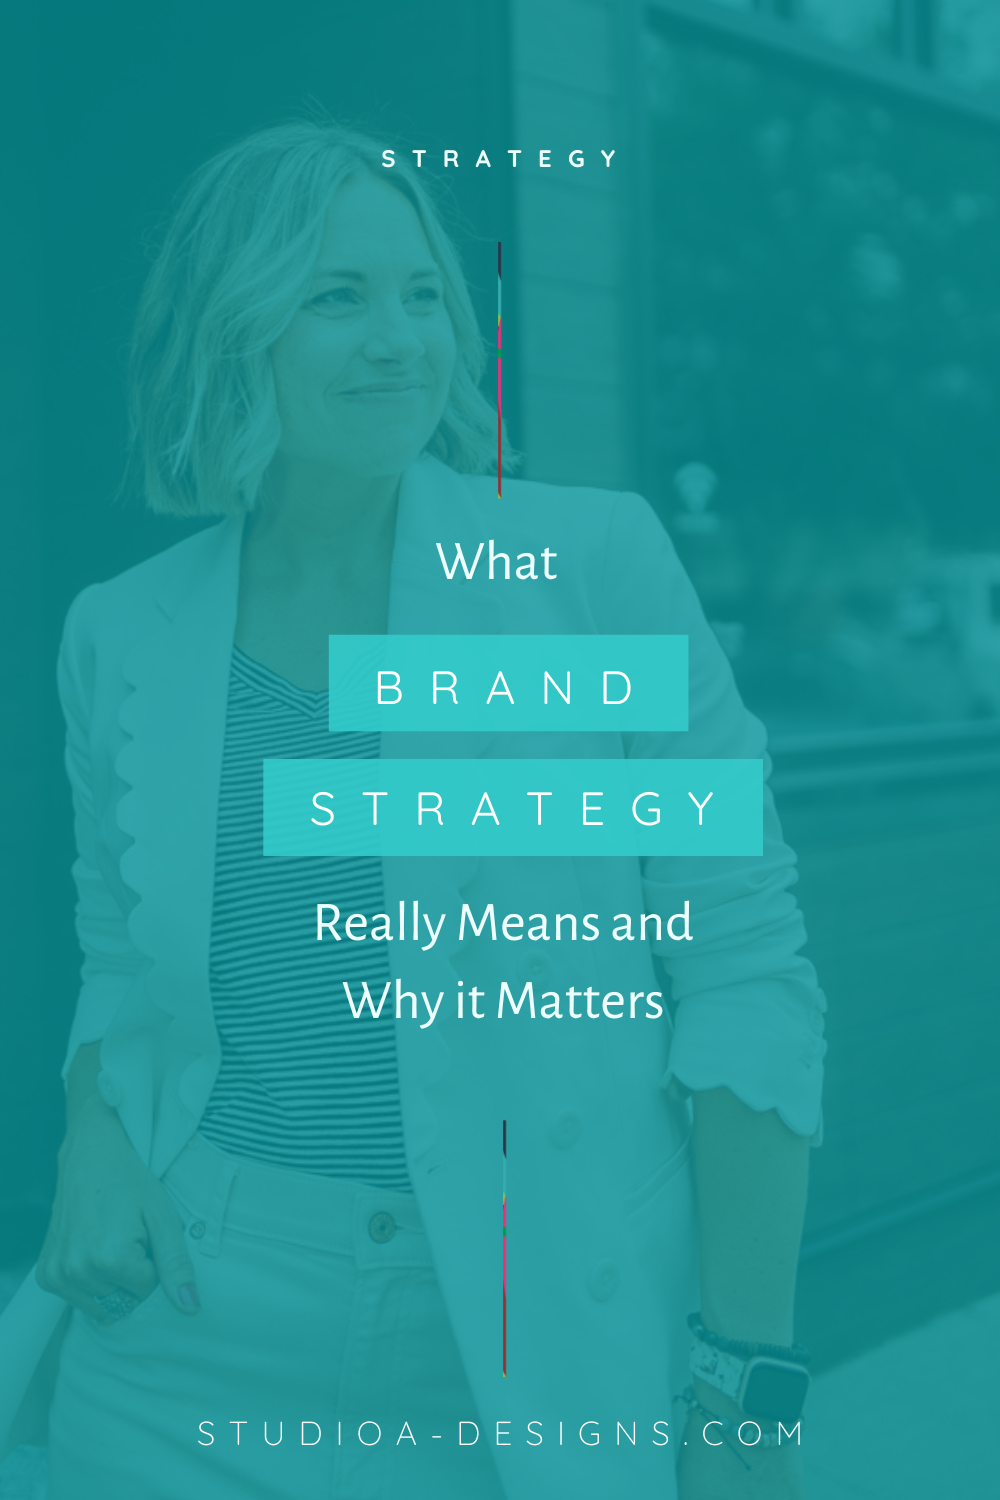 What Brand Strategy Means and Why it Matters